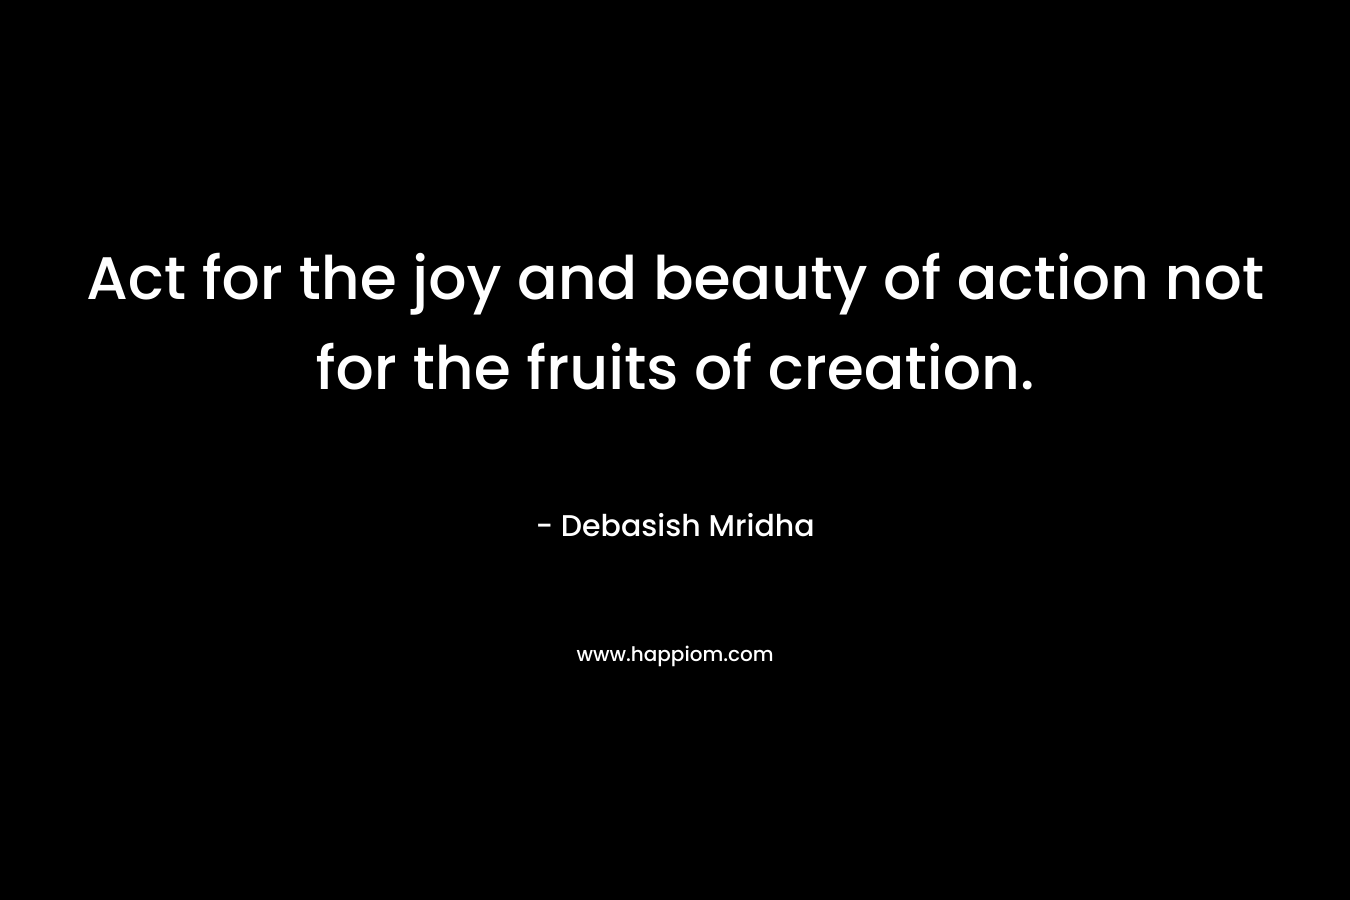 Act for the joy and beauty of action not for the fruits of creation.